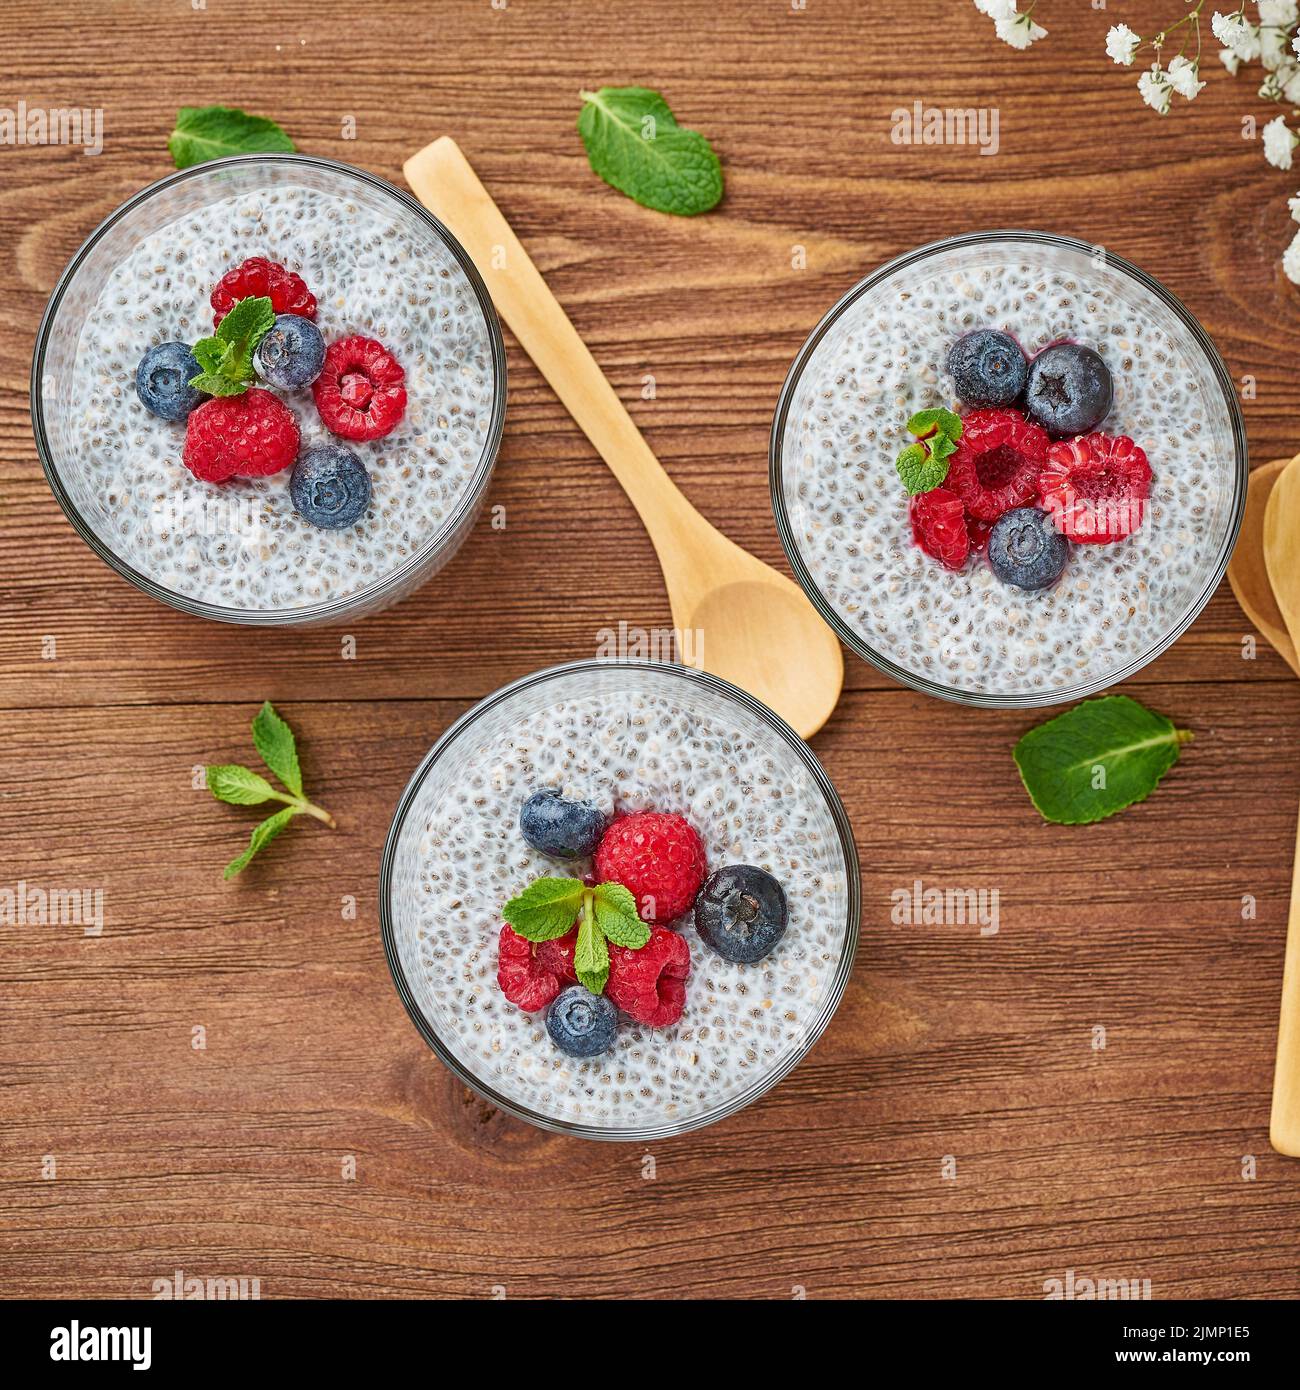 Banner with Chia pudding in bowl with fresh berries raspberries, blueberries. Stock Photo